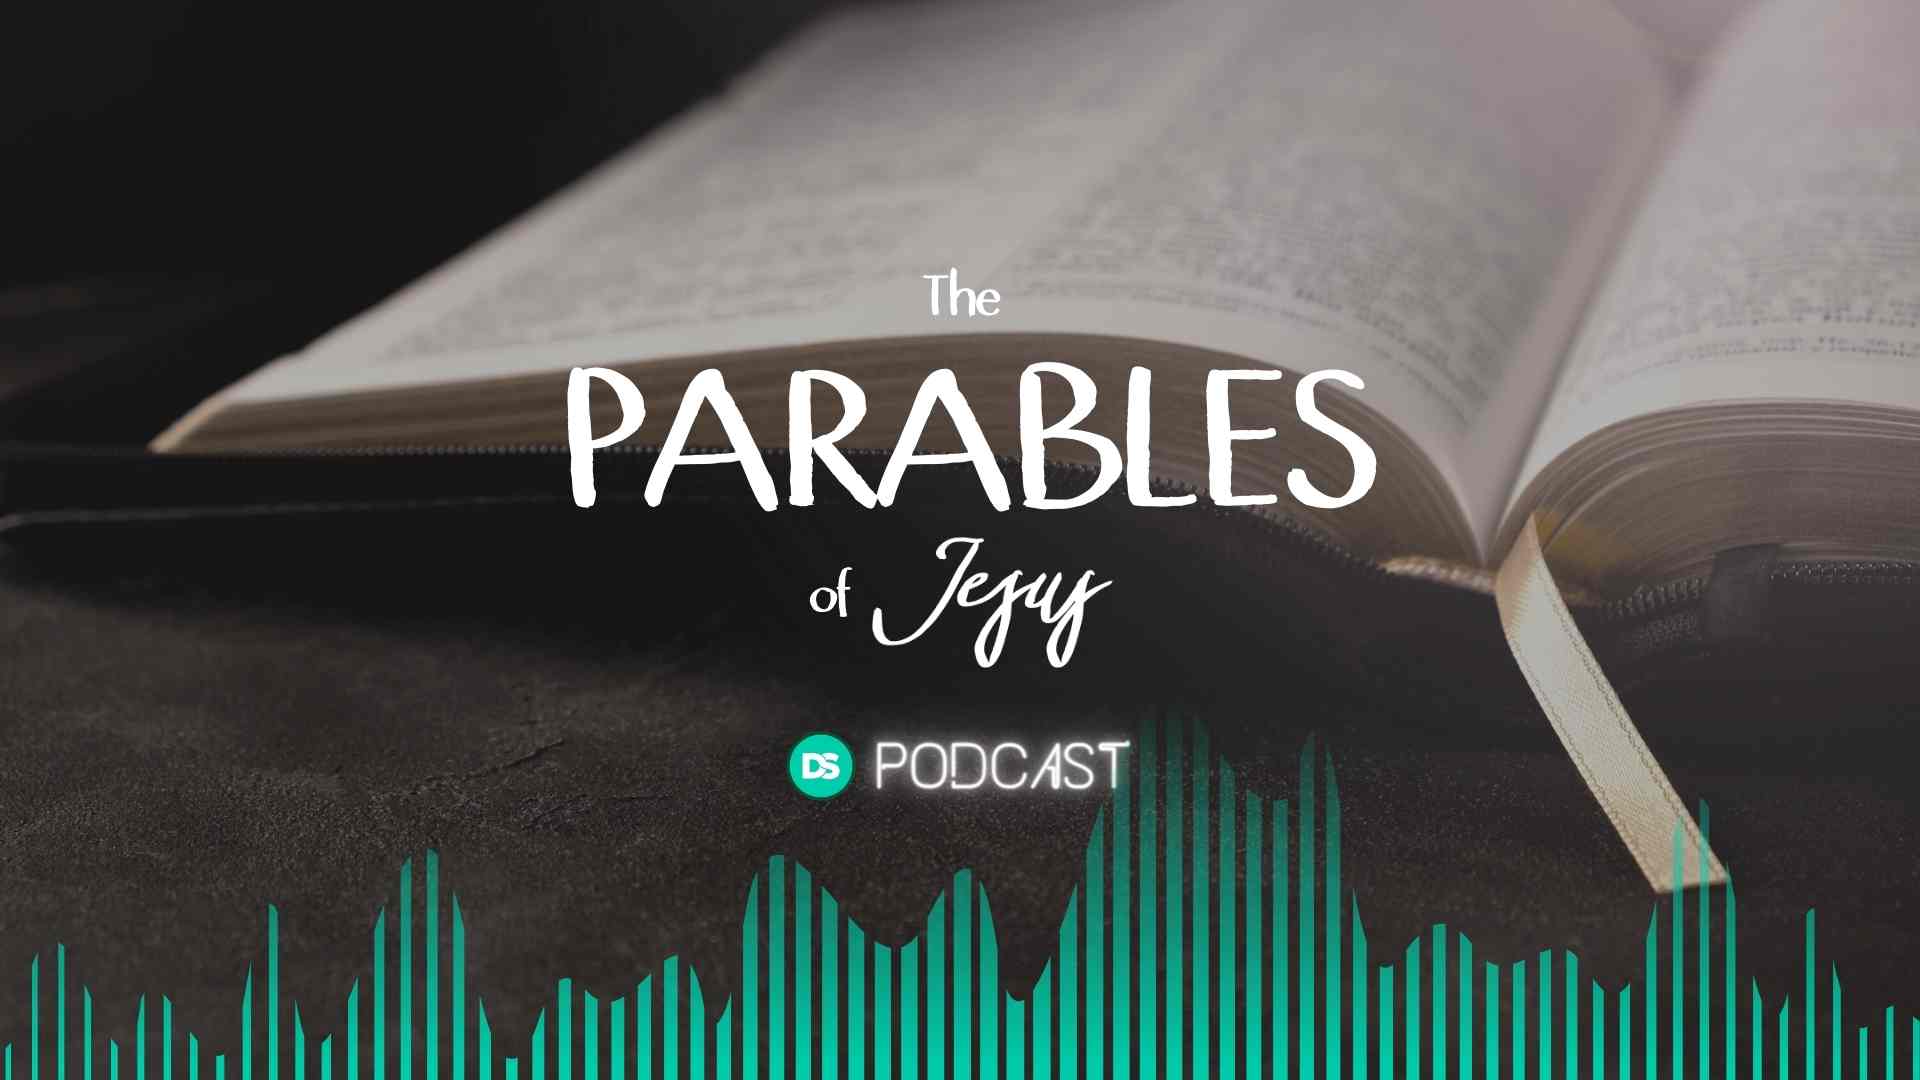 Introducing Our New Series on the Parables of Jesus 2